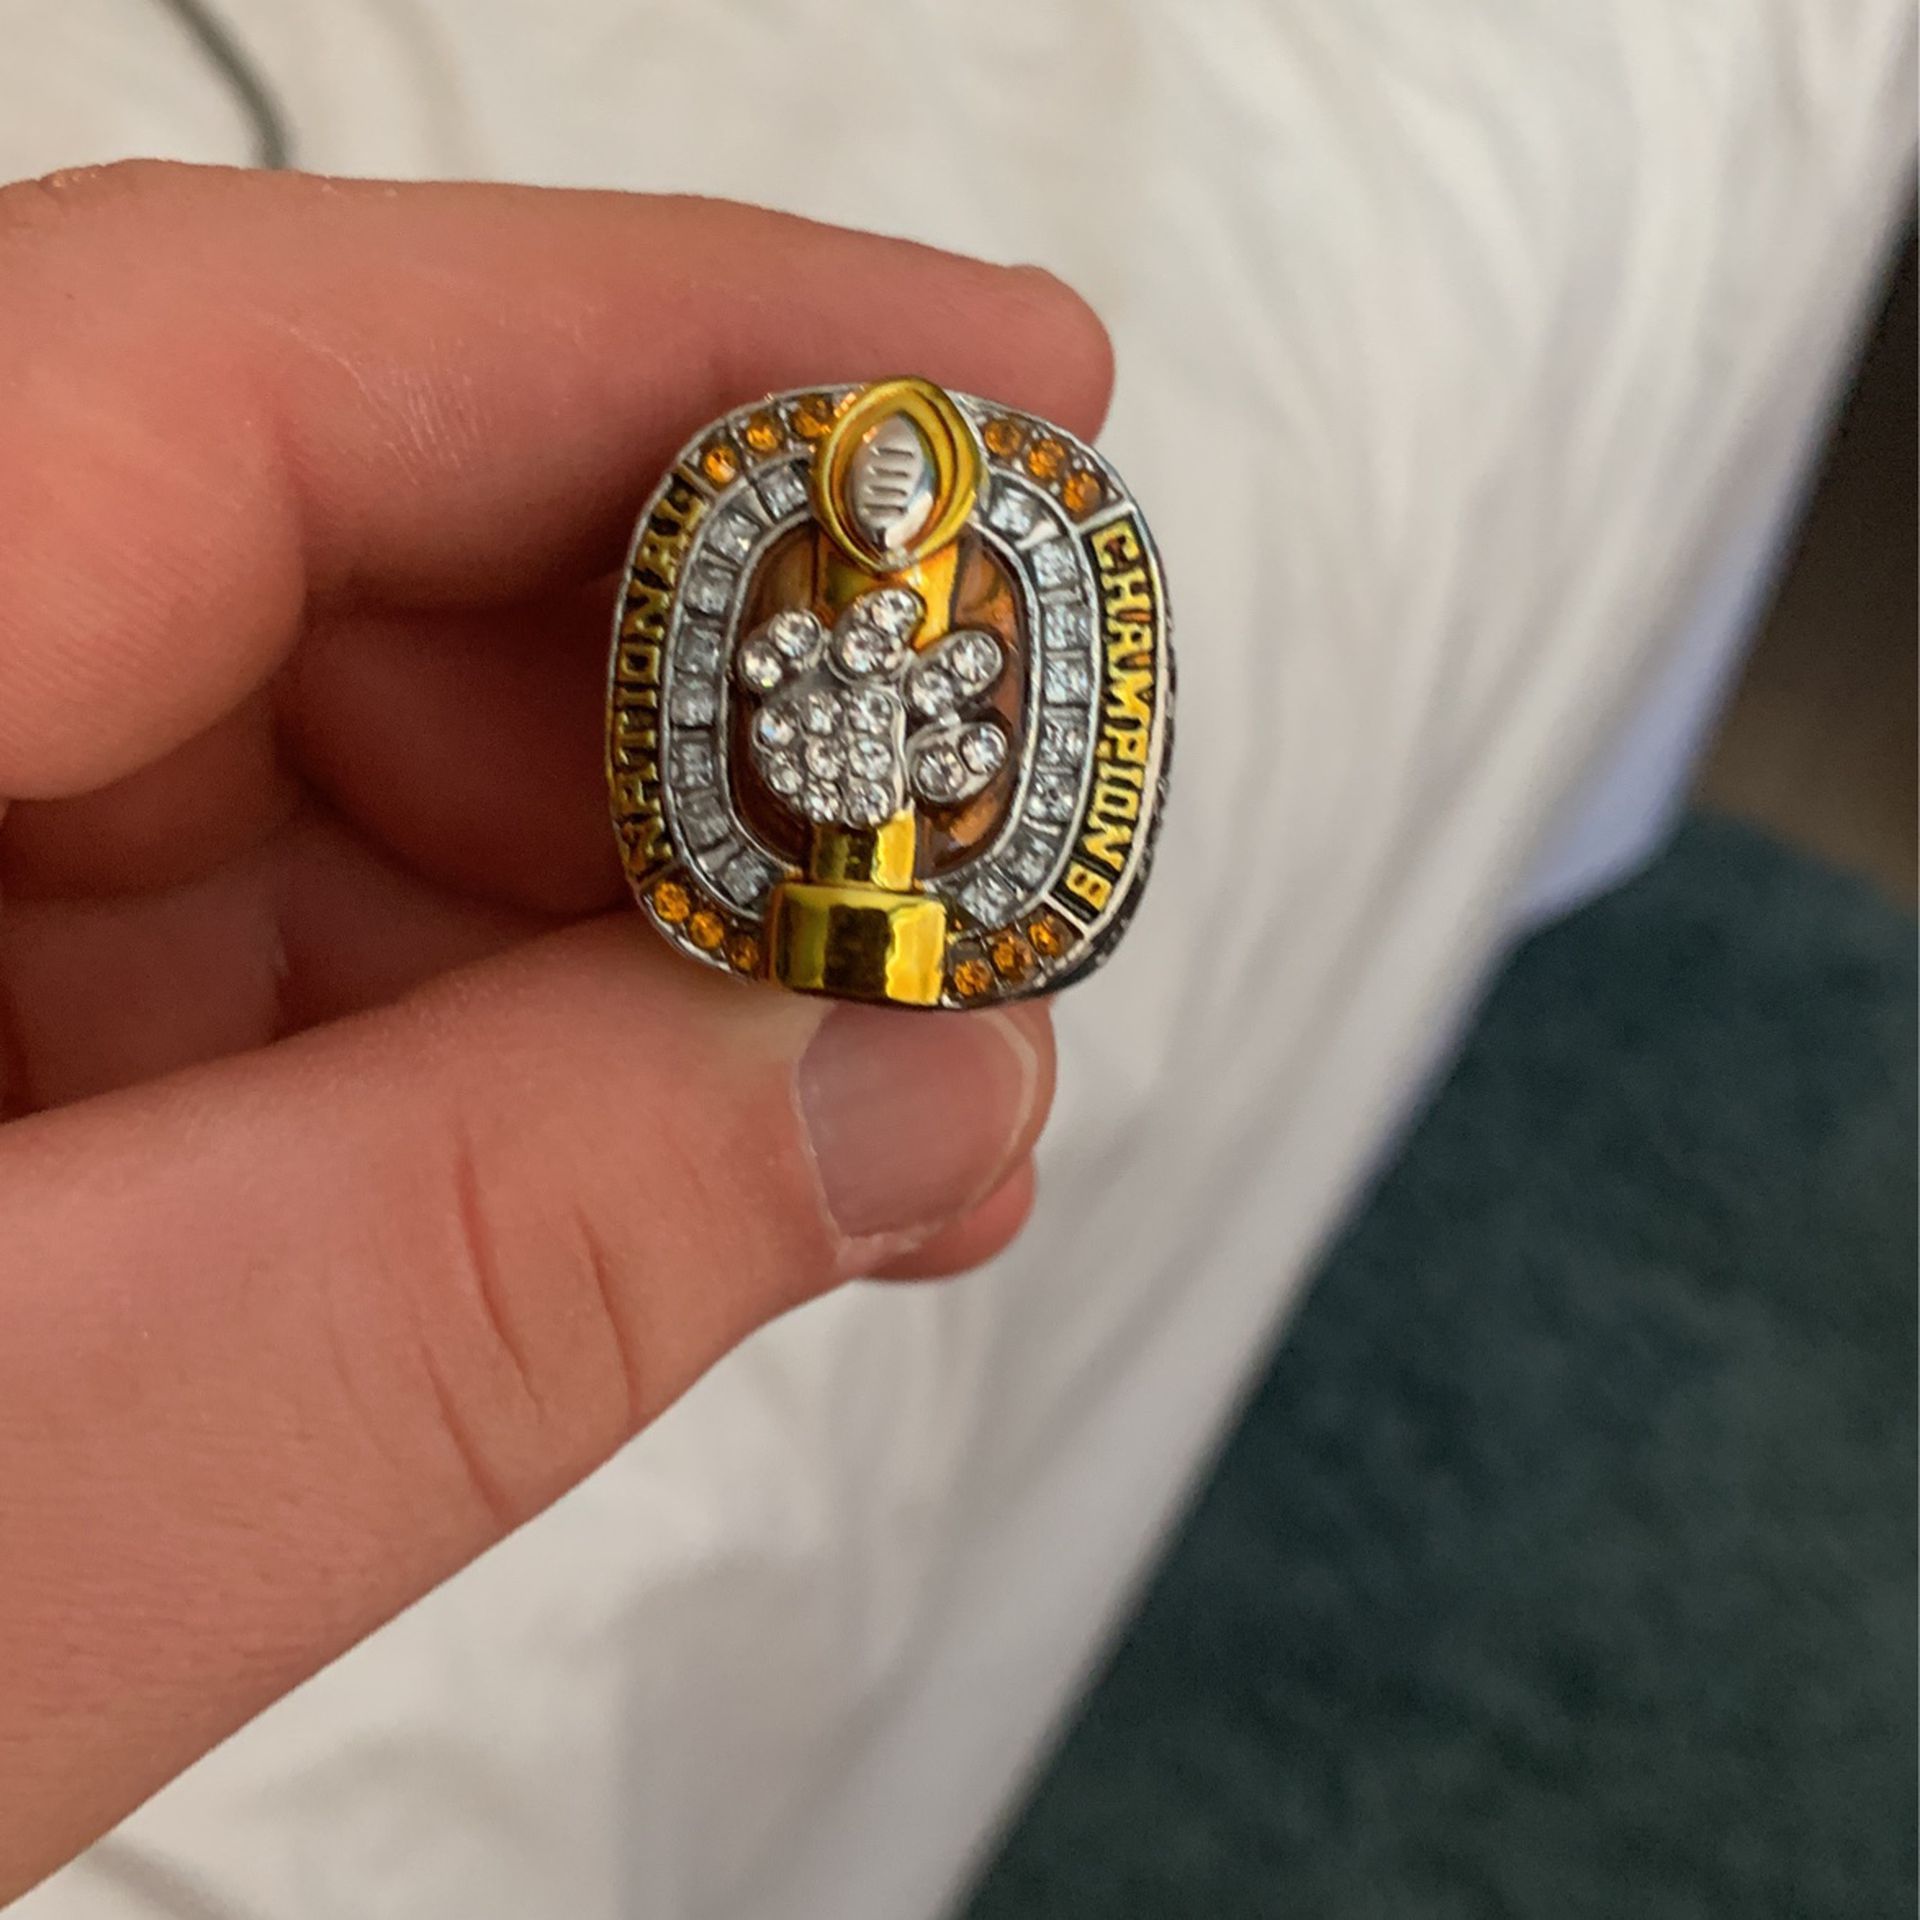 Clemson Tigers national champions ring